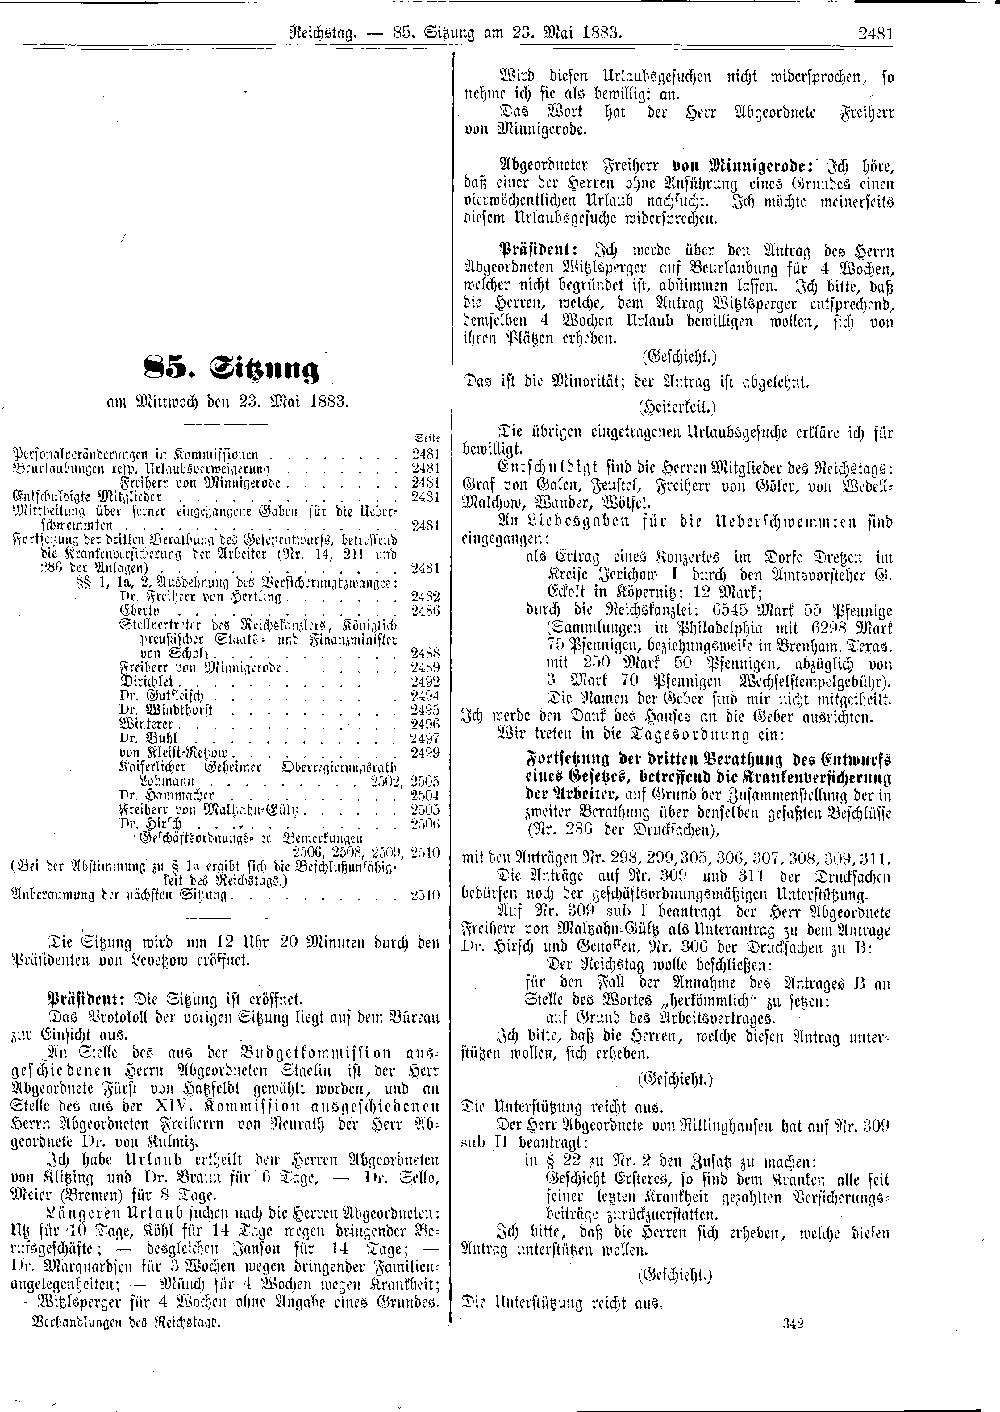 Scan of page 2481